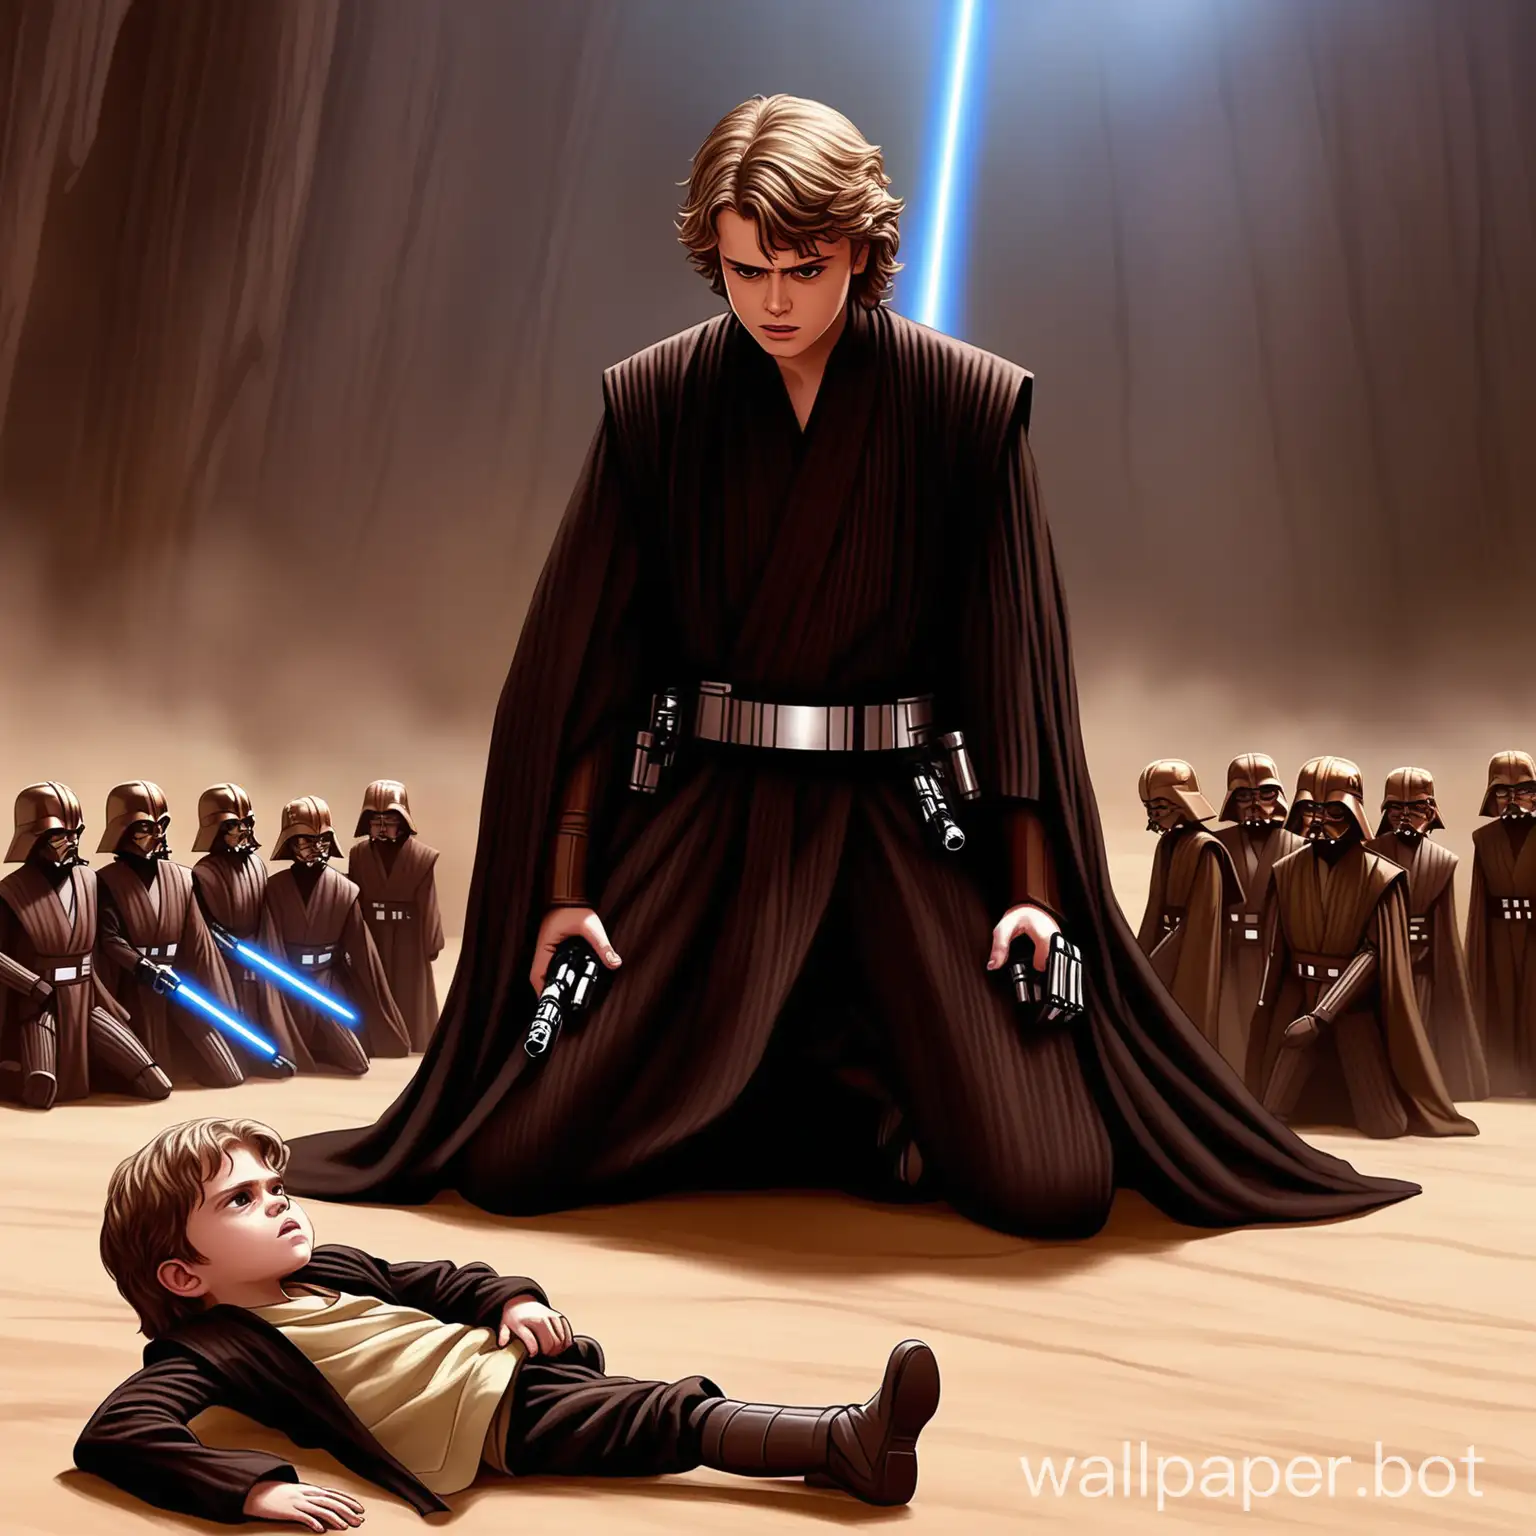 anakin killing the younglings in star wars